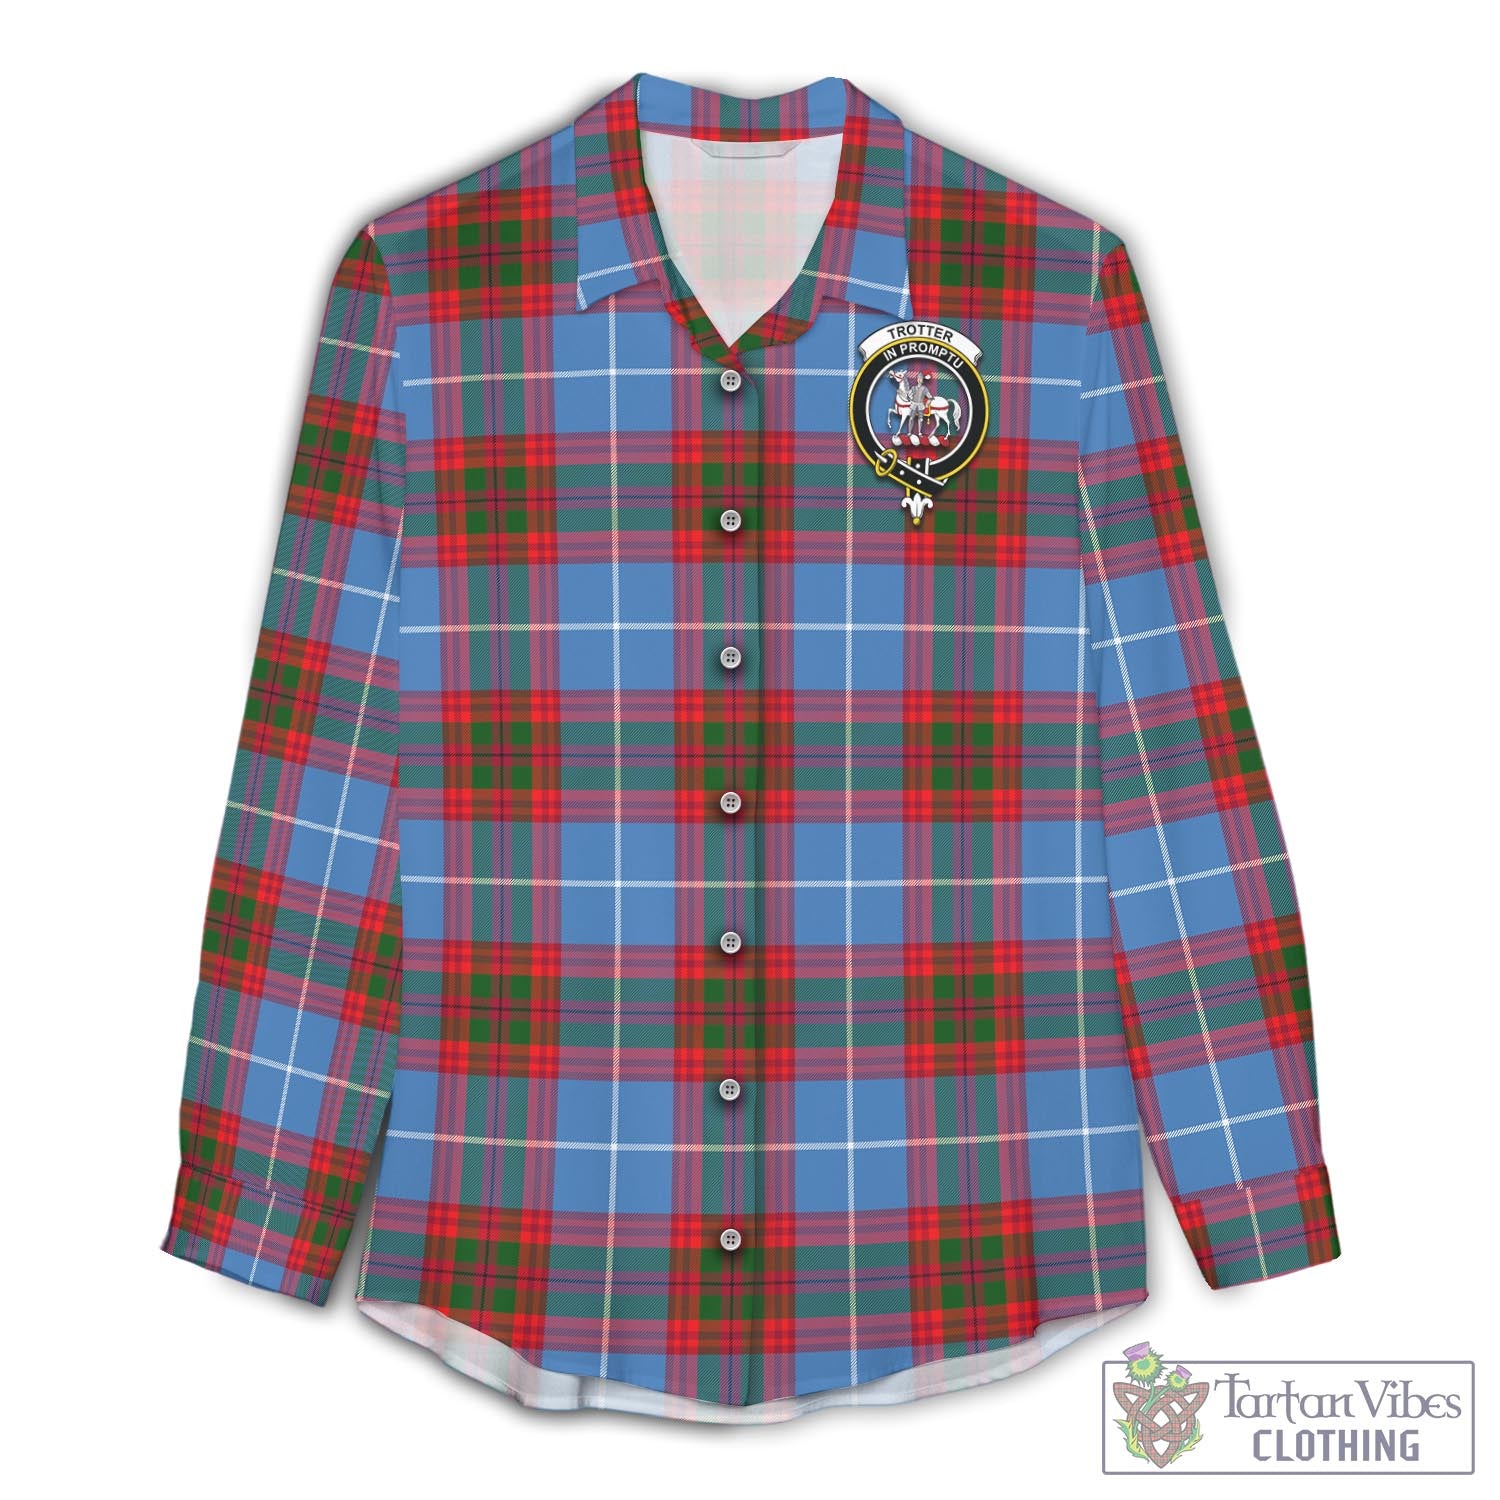 Tartan Vibes Clothing Trotter Tartan Womens Casual Shirt with Family Crest